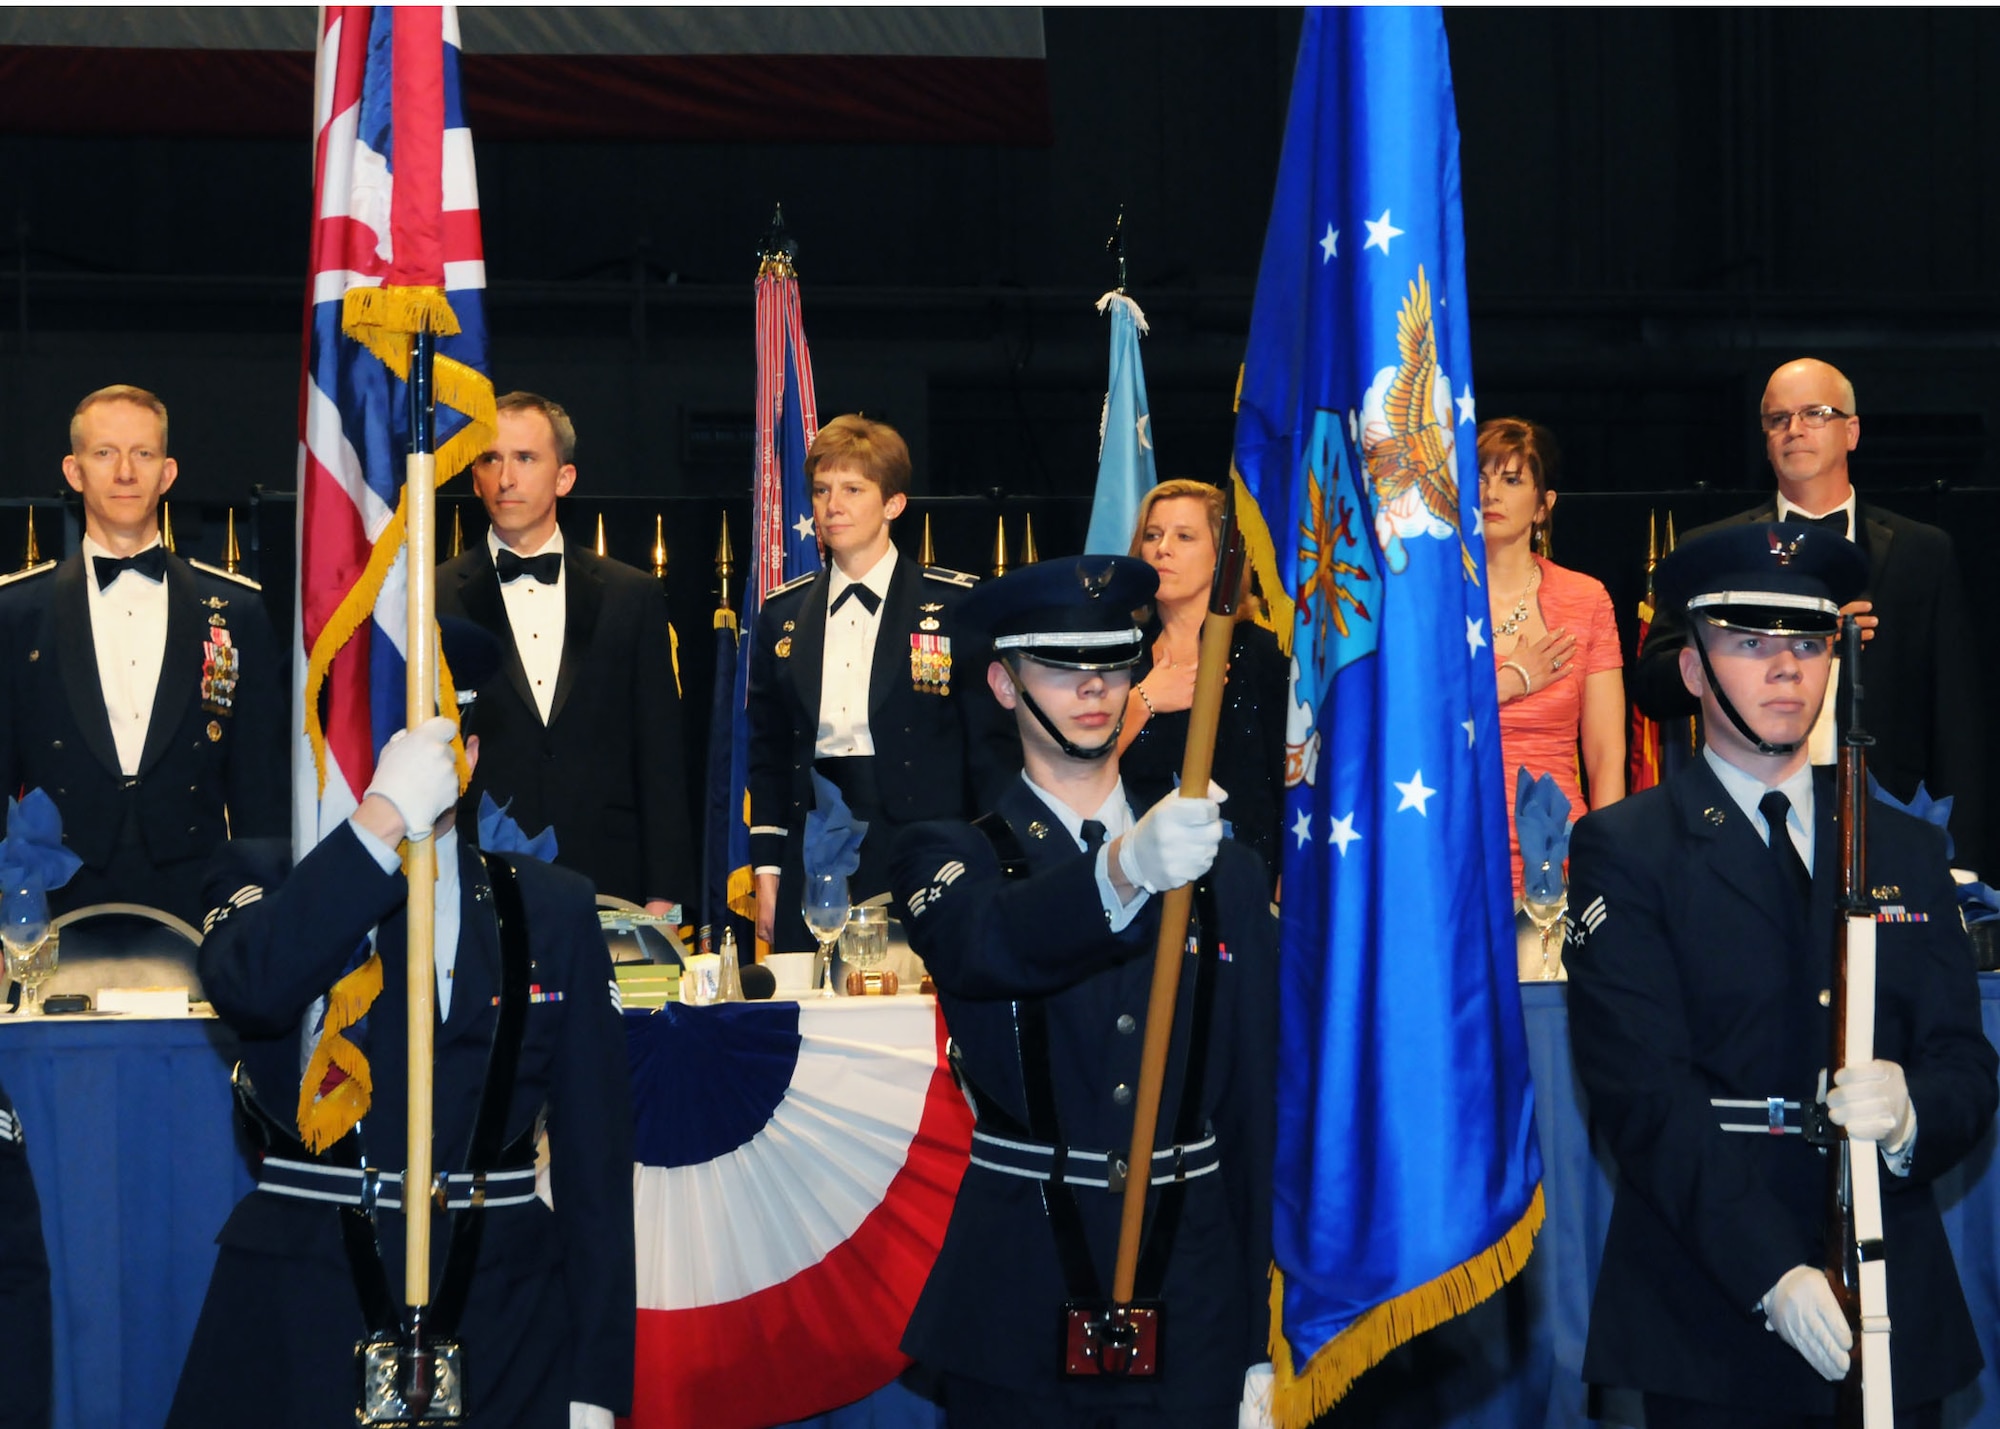 WRIGHT-PATTERSON AIR FORCE BASE, Ohio – The National Air and Space Intelligence Center’s color guard present the colors during the center's dining out ceremony at the National Museum of the Air Force Friday, March 27, 2015. The ceremony is held annually to boost morale and esprit de corps while developing friendships and better working relationships. (U.S. Air Force photo by Staff Sgt. Marianne E. Lane/Released)